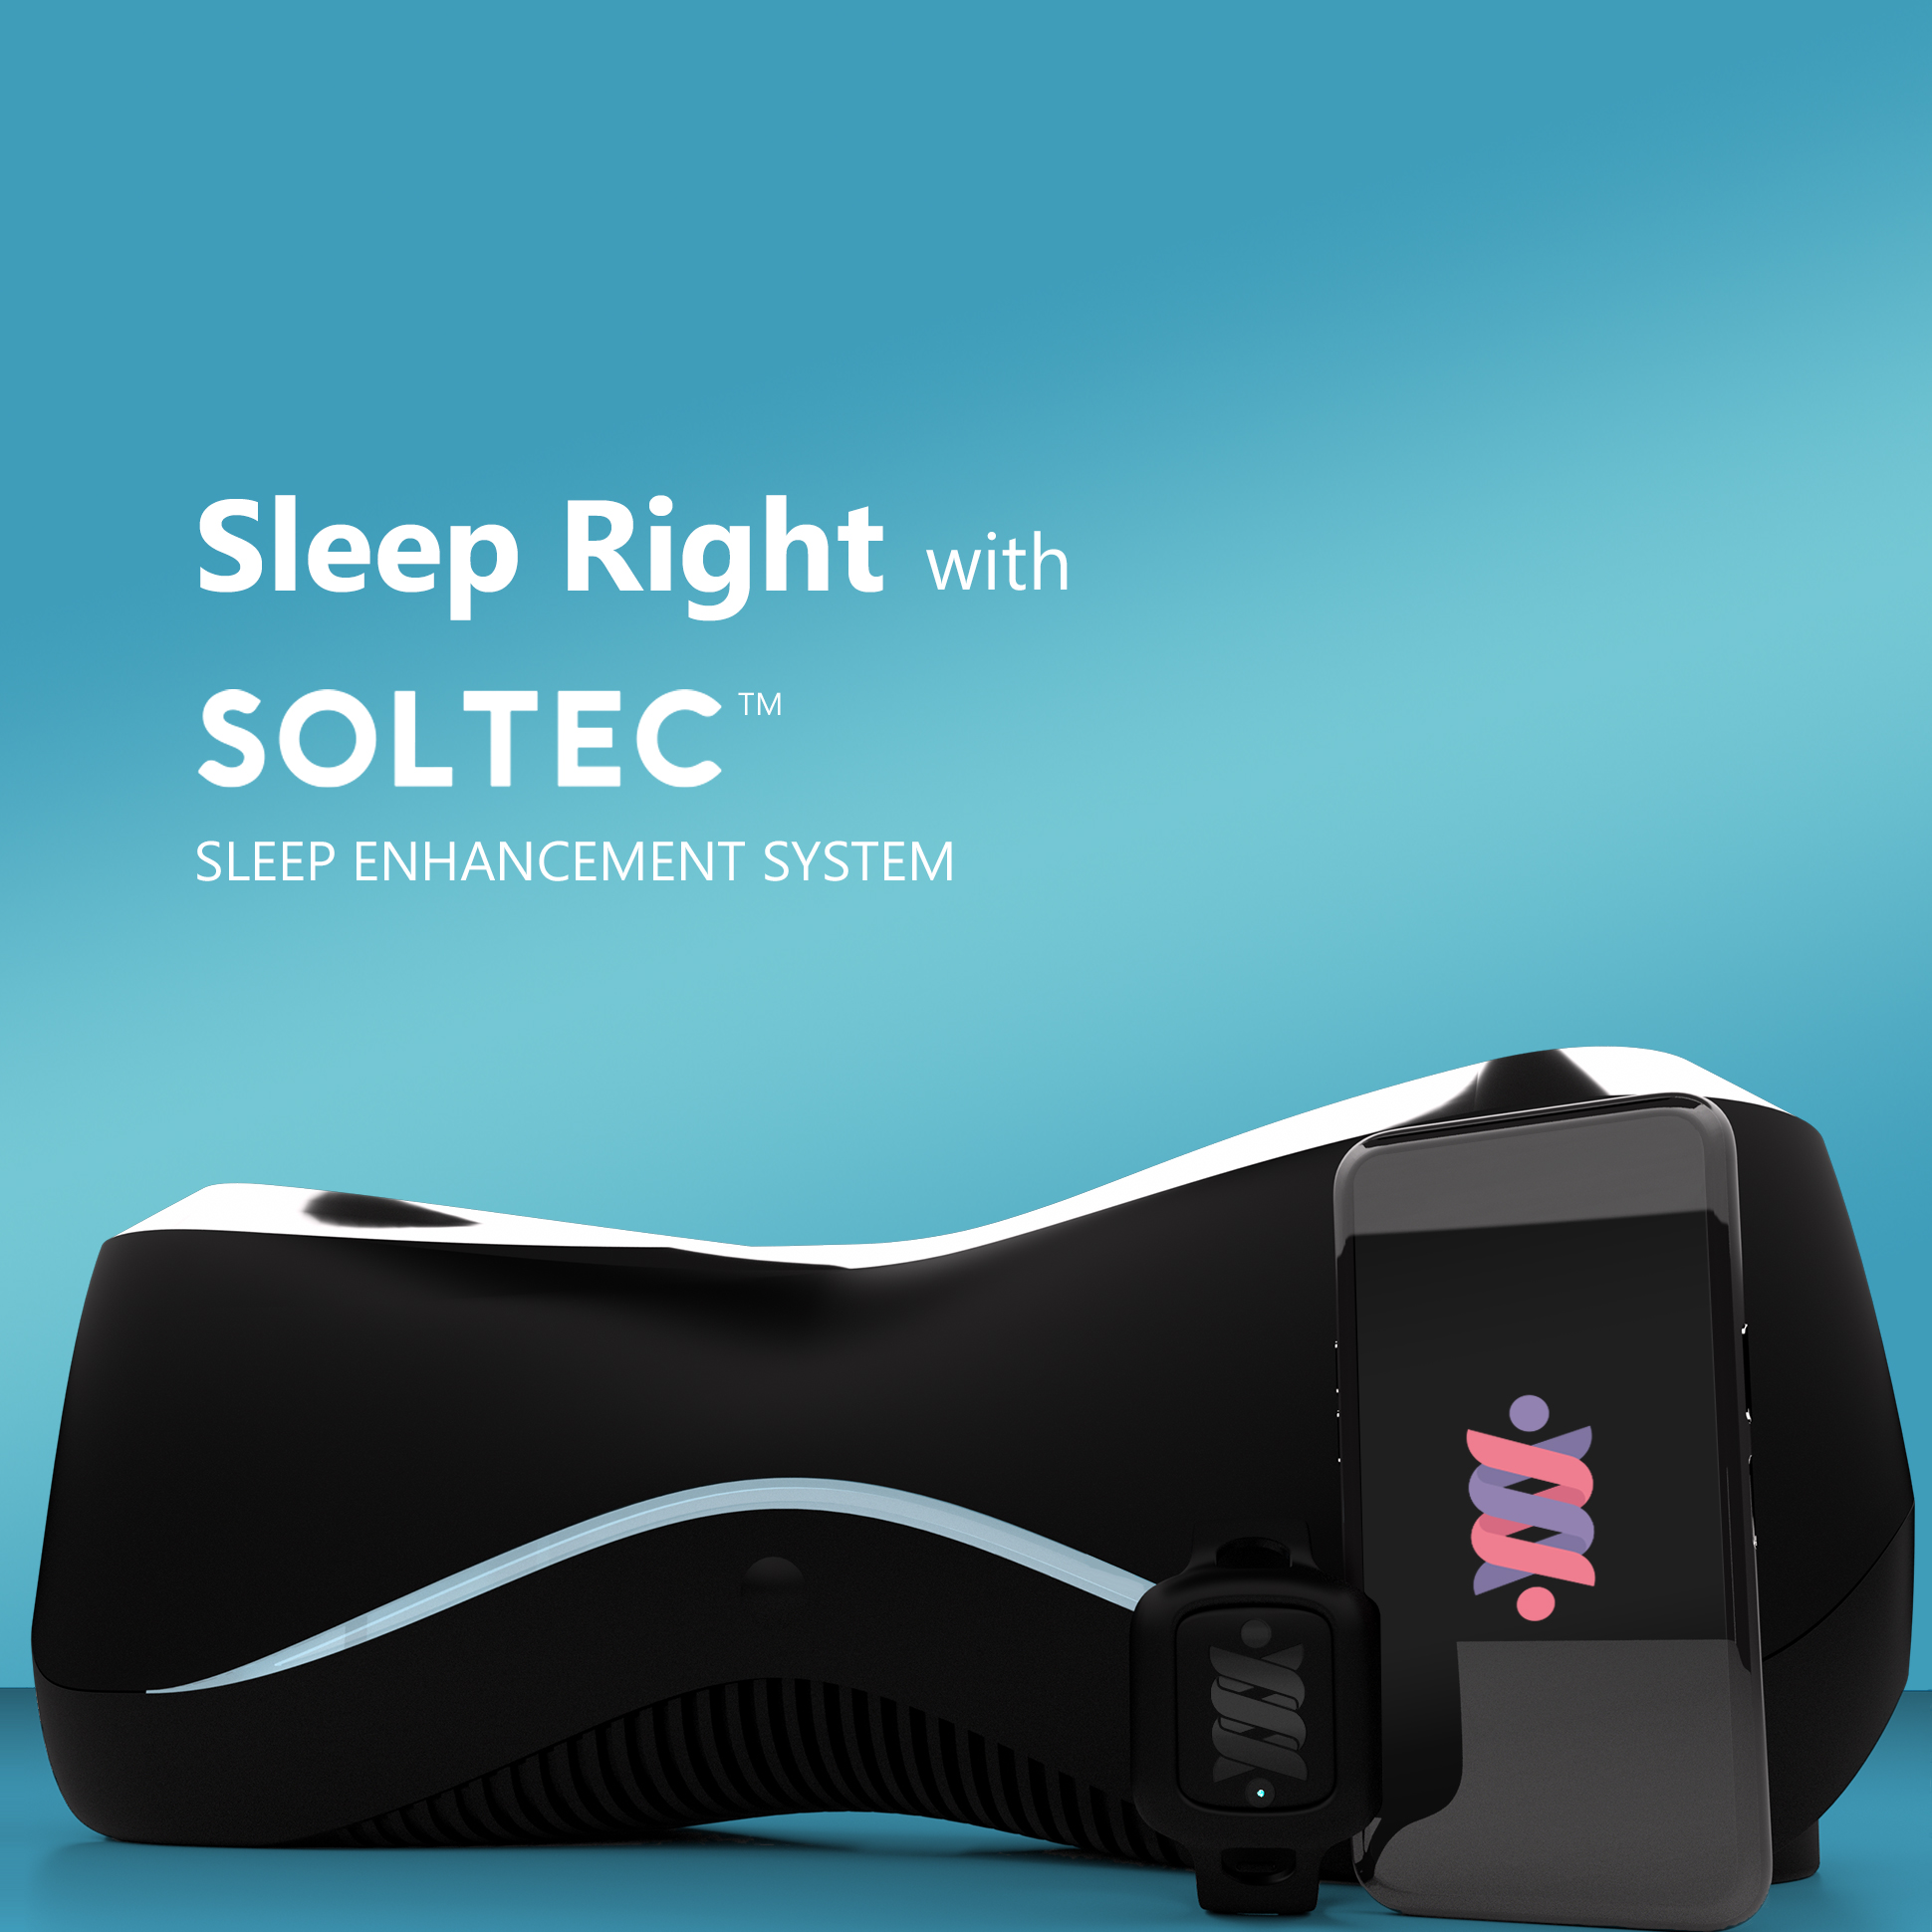 Sleep right with SOLTEC square Image depicts  Z TRACK, Z GEN and SOLTEC  Z App